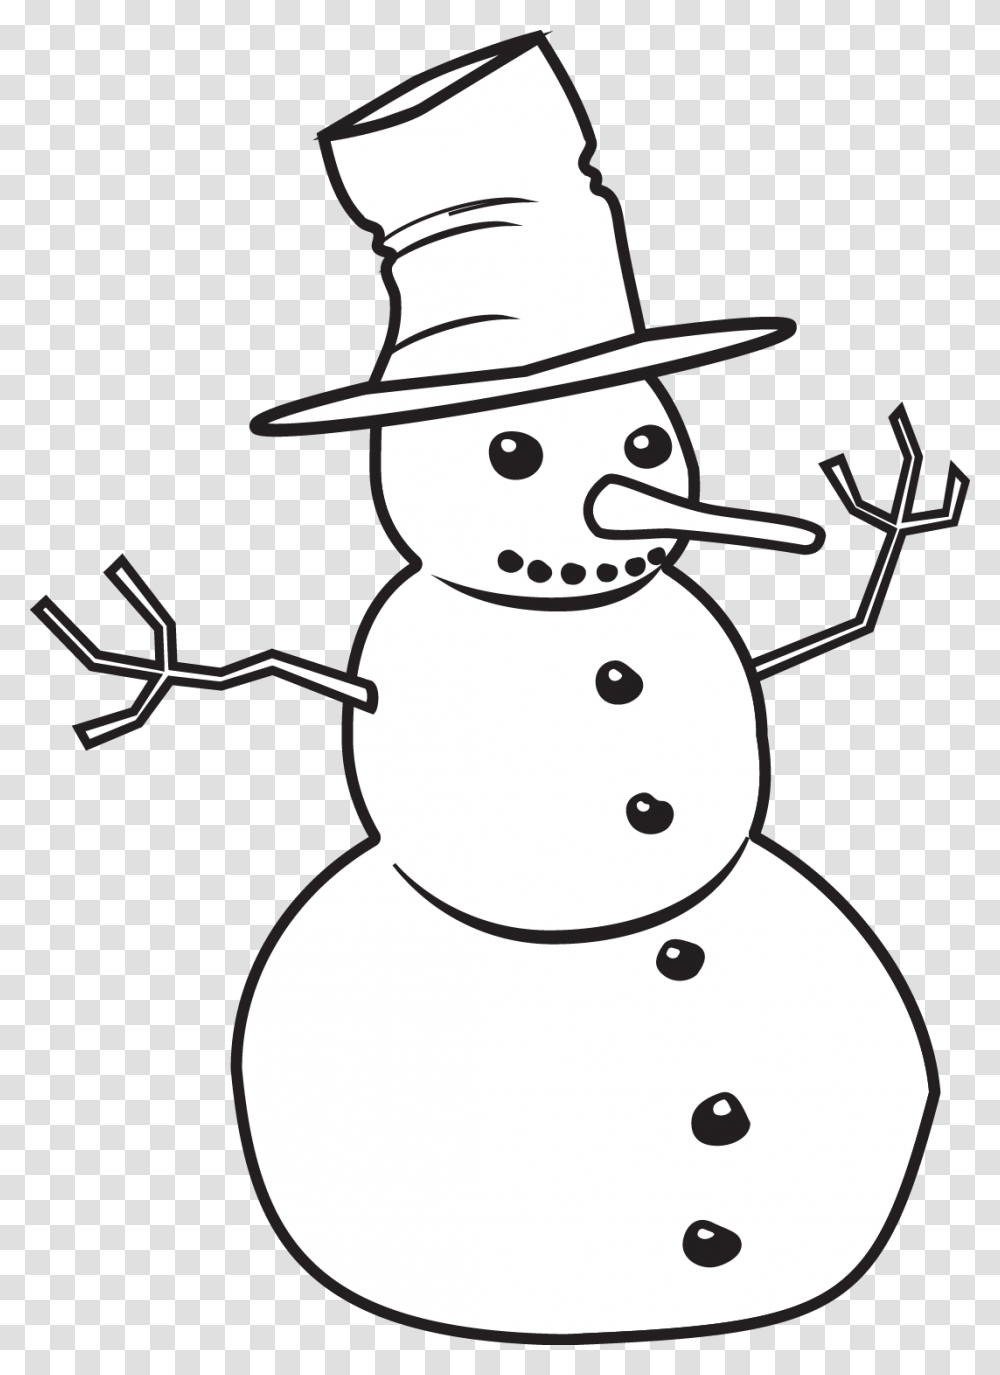 Snowman Clip Art Black And White Snowman Clip Art Black And White, Nature, Outdoors, Winter, Mountain Transparent Png